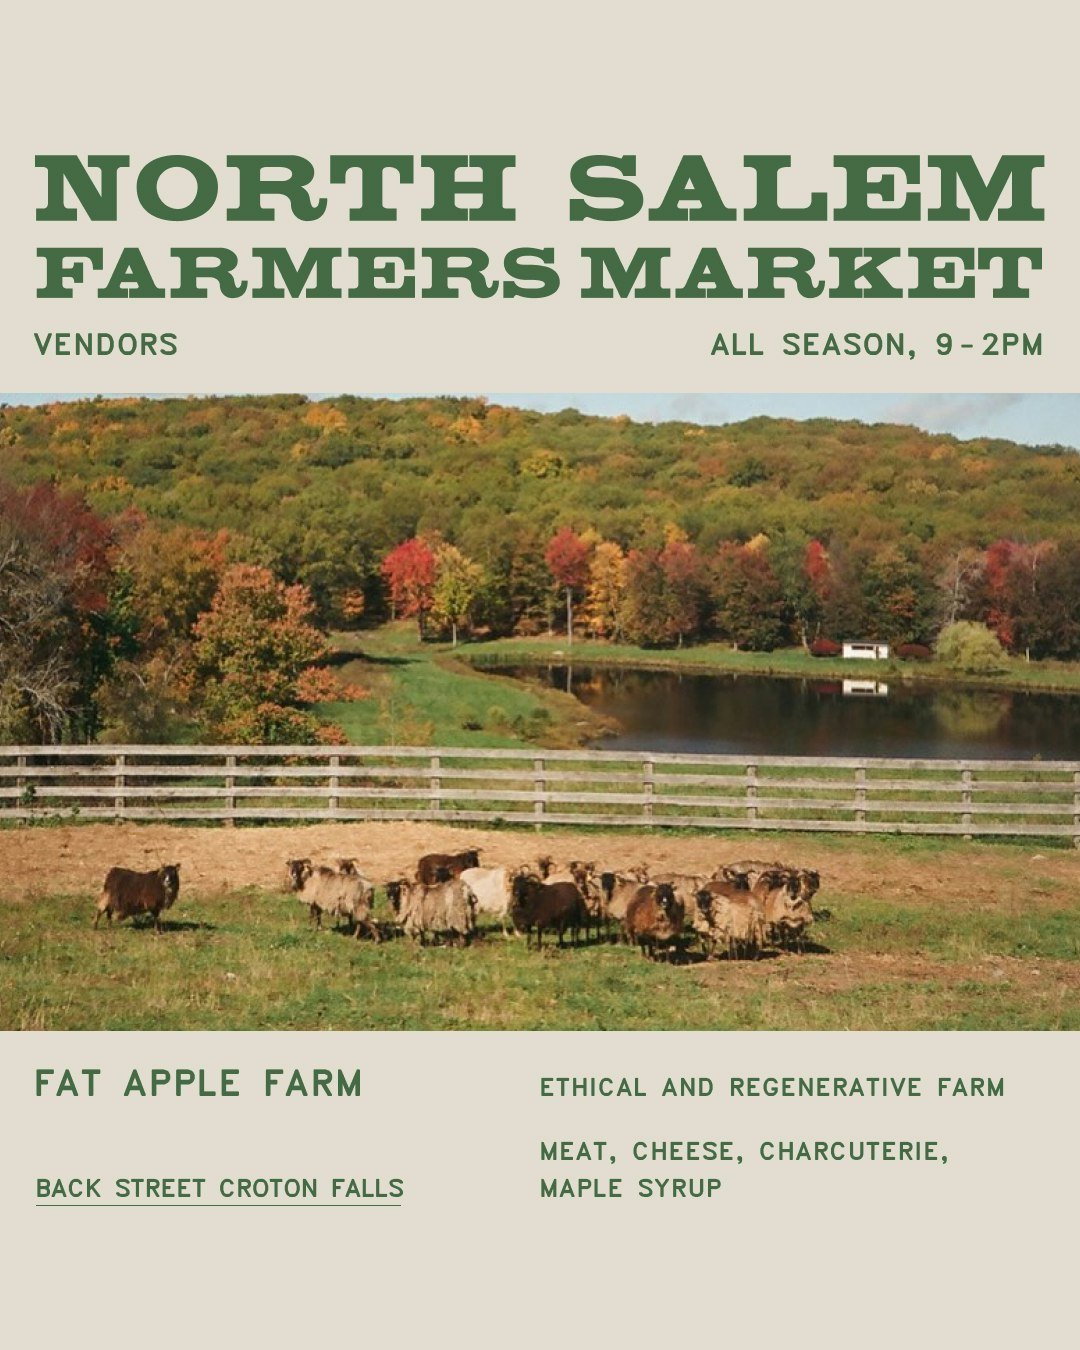 Fat Apple Farm is a sustainable, ethical livestock farm that understands what a gift it is to work on 400 acres in the Hudson Valley - farming in a way that treats their animals with dignity and holistically restores the land. 

The best part? These 